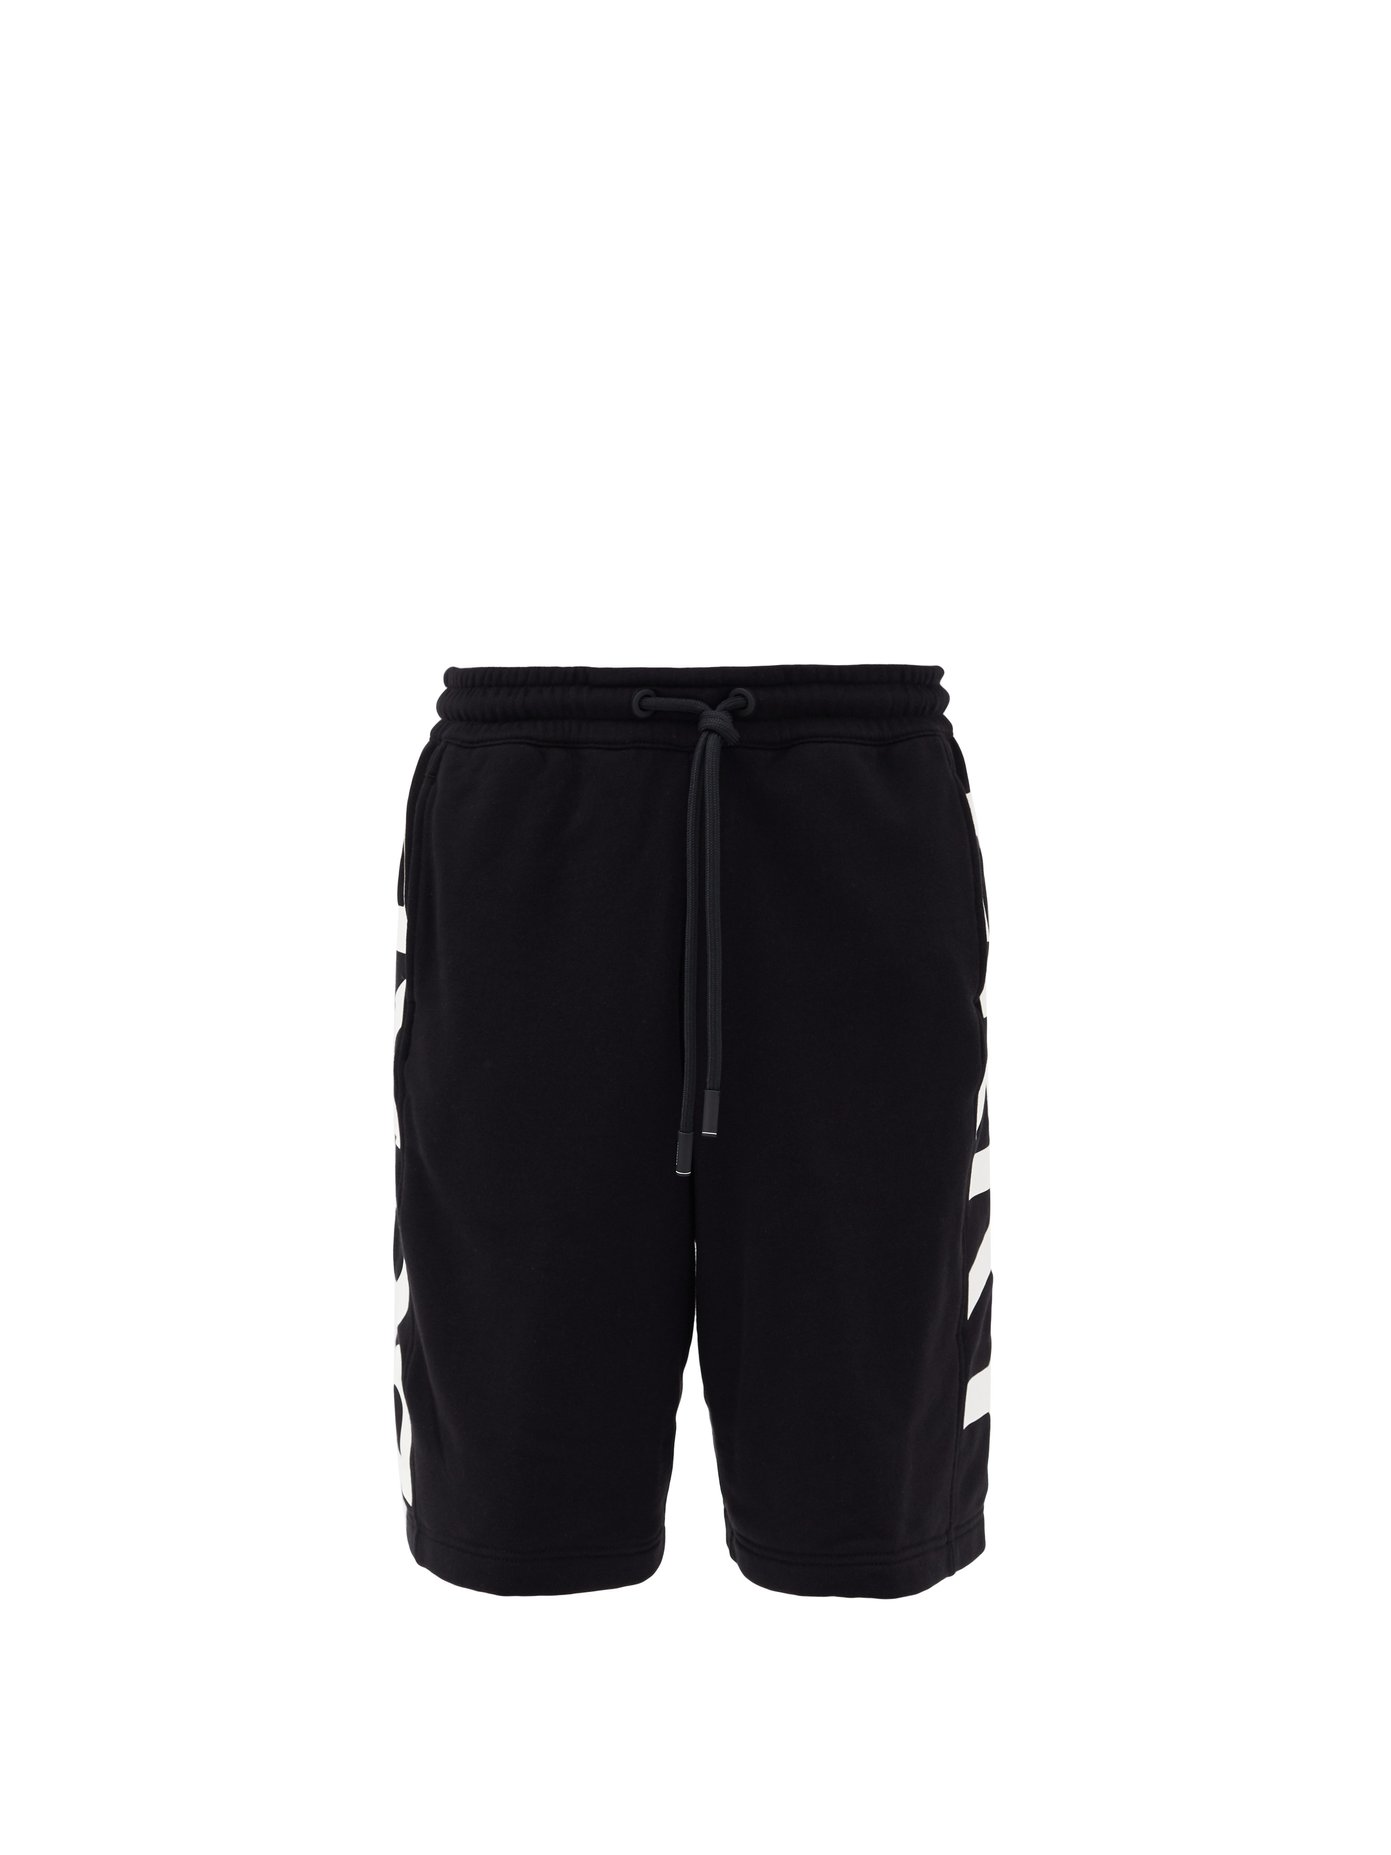 burberry jersey shorts